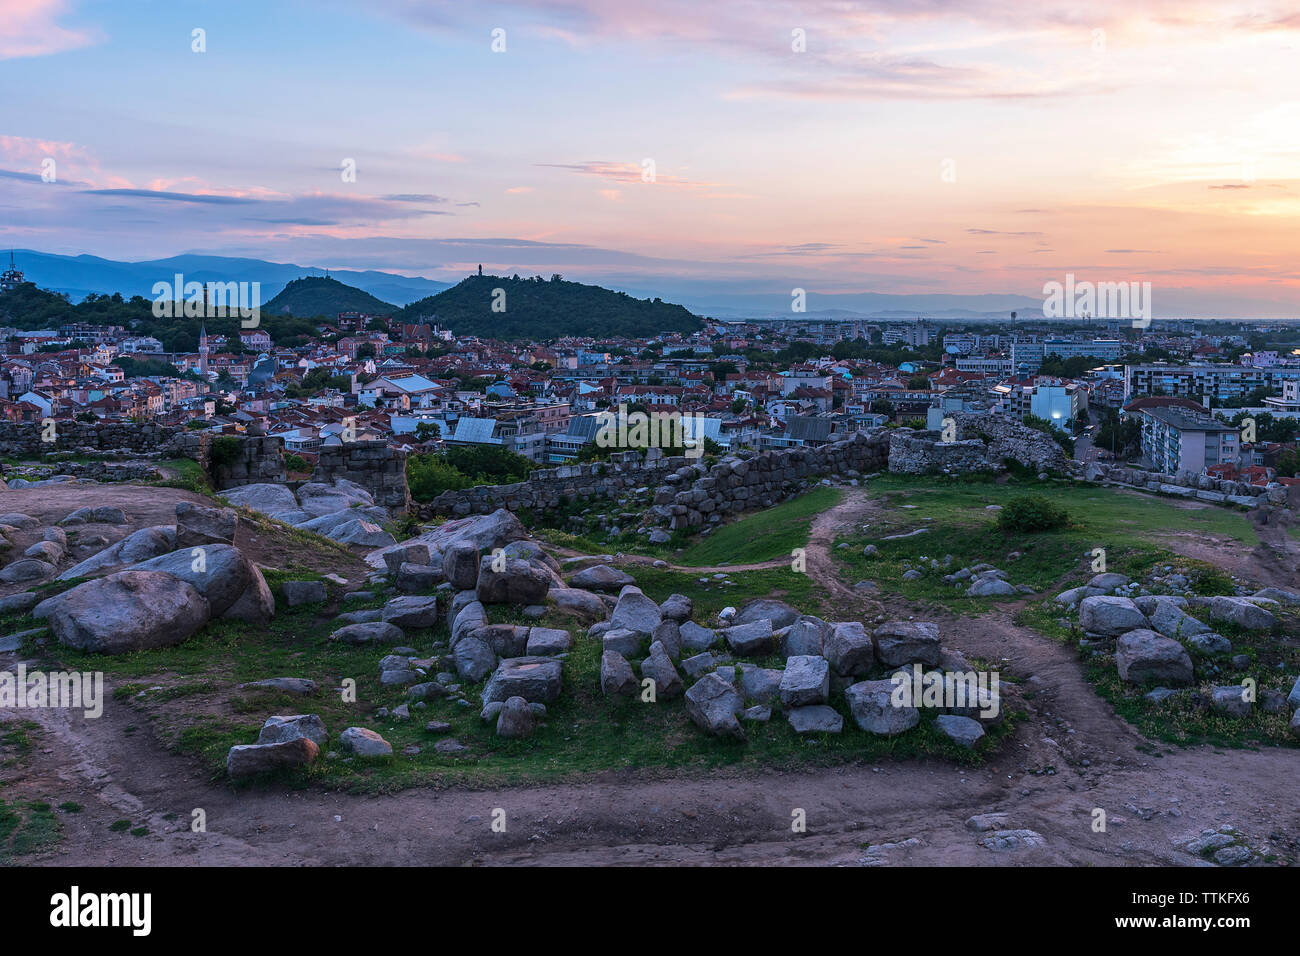 Summer sunset over Plovdiv city, Bulgaria. European capital of culture 2019 and the oldest living city in Europe. Photo from one of the hills Stock Photo